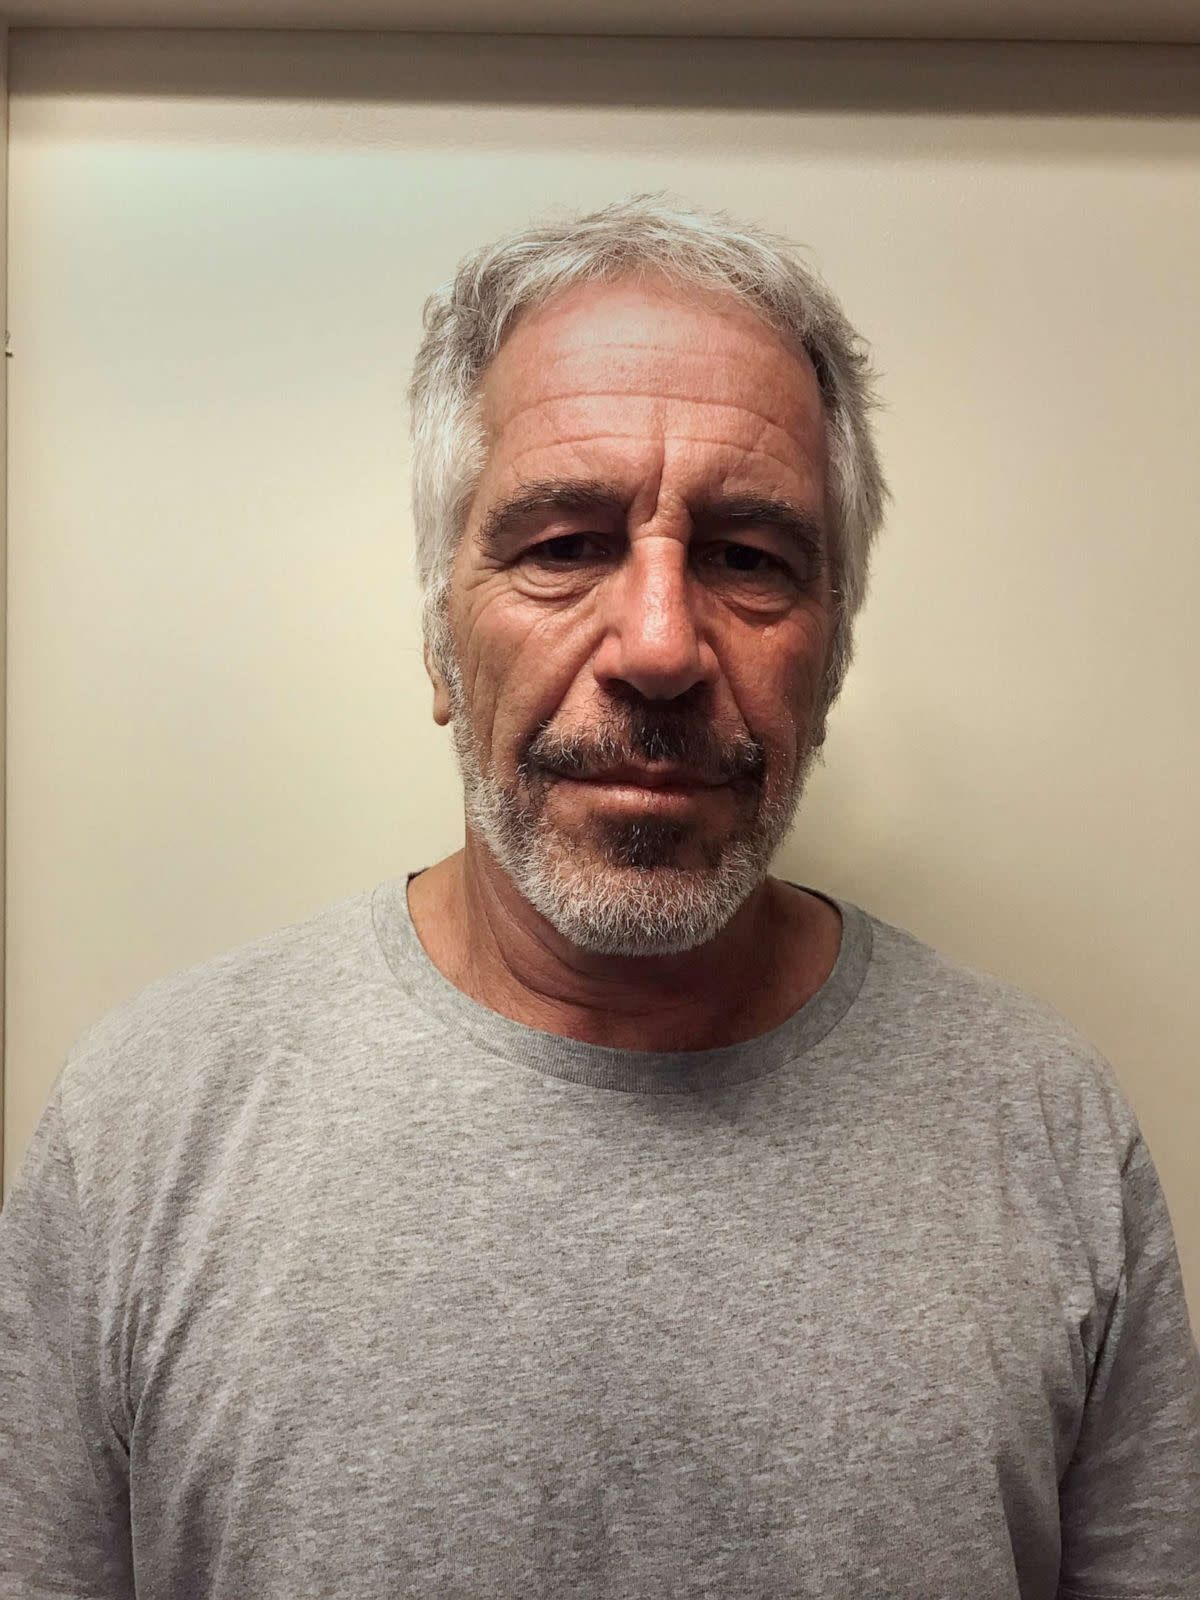 PHOTO: Jeffrey Epstein in a photo released by the New York State Division of Criminal Justice. (New York State Sex Offender Registry, FILE)